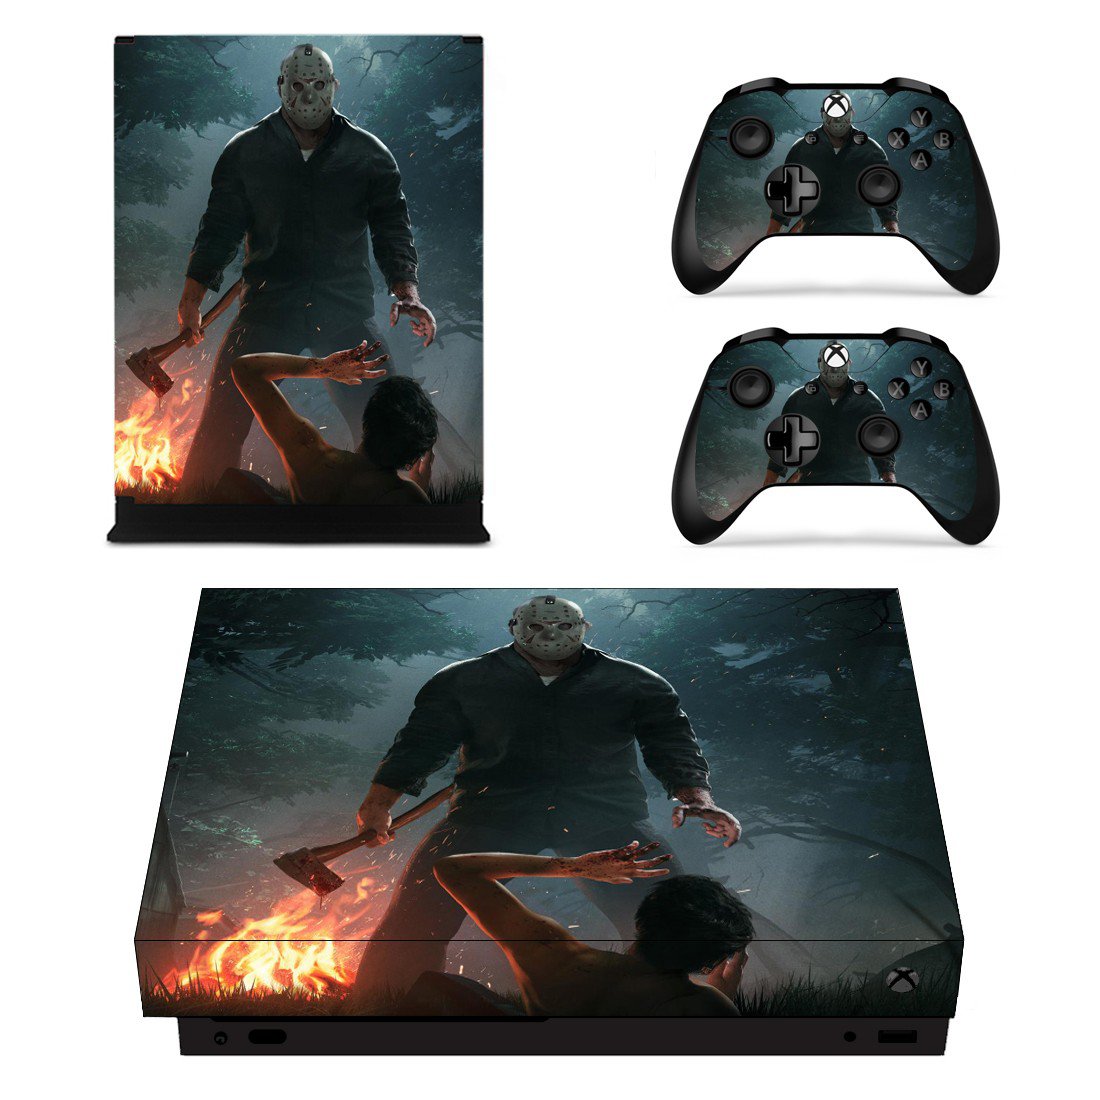 Friday the 13th for Xbox One X and Controllers Skin Sticker